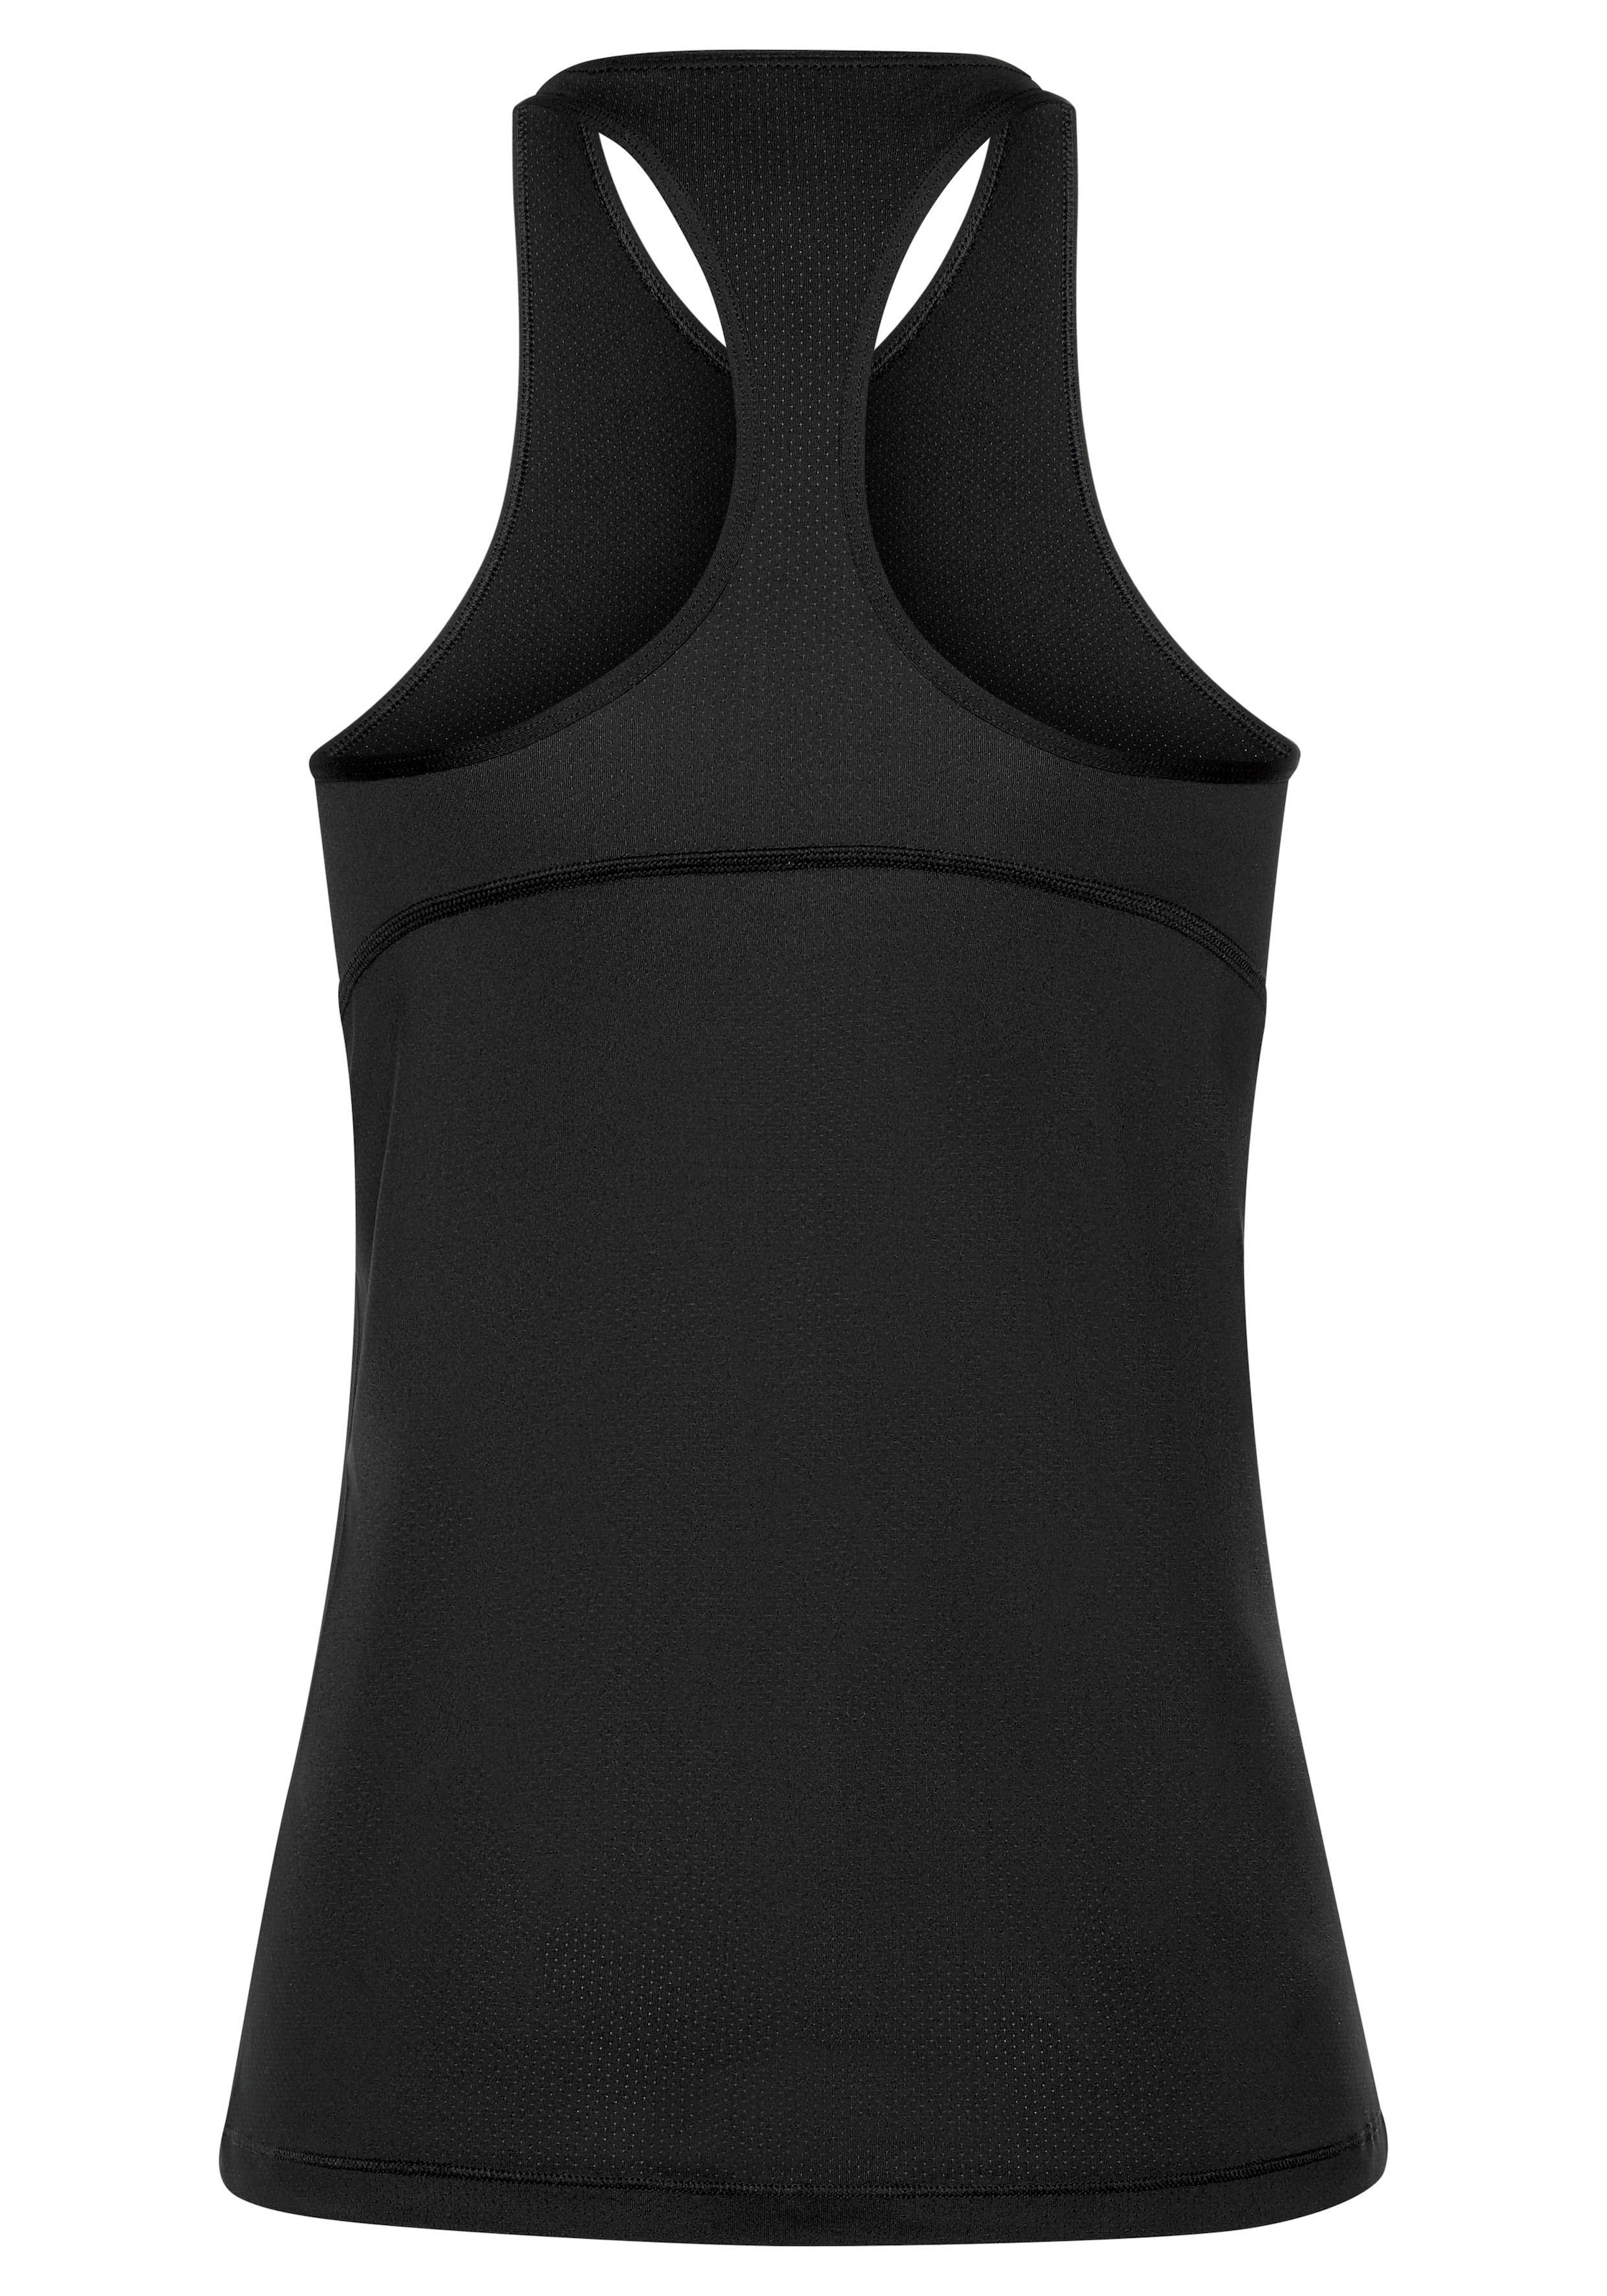 »WOMAN TANK online NP OVER ALL Funktionstop Nike MESH«